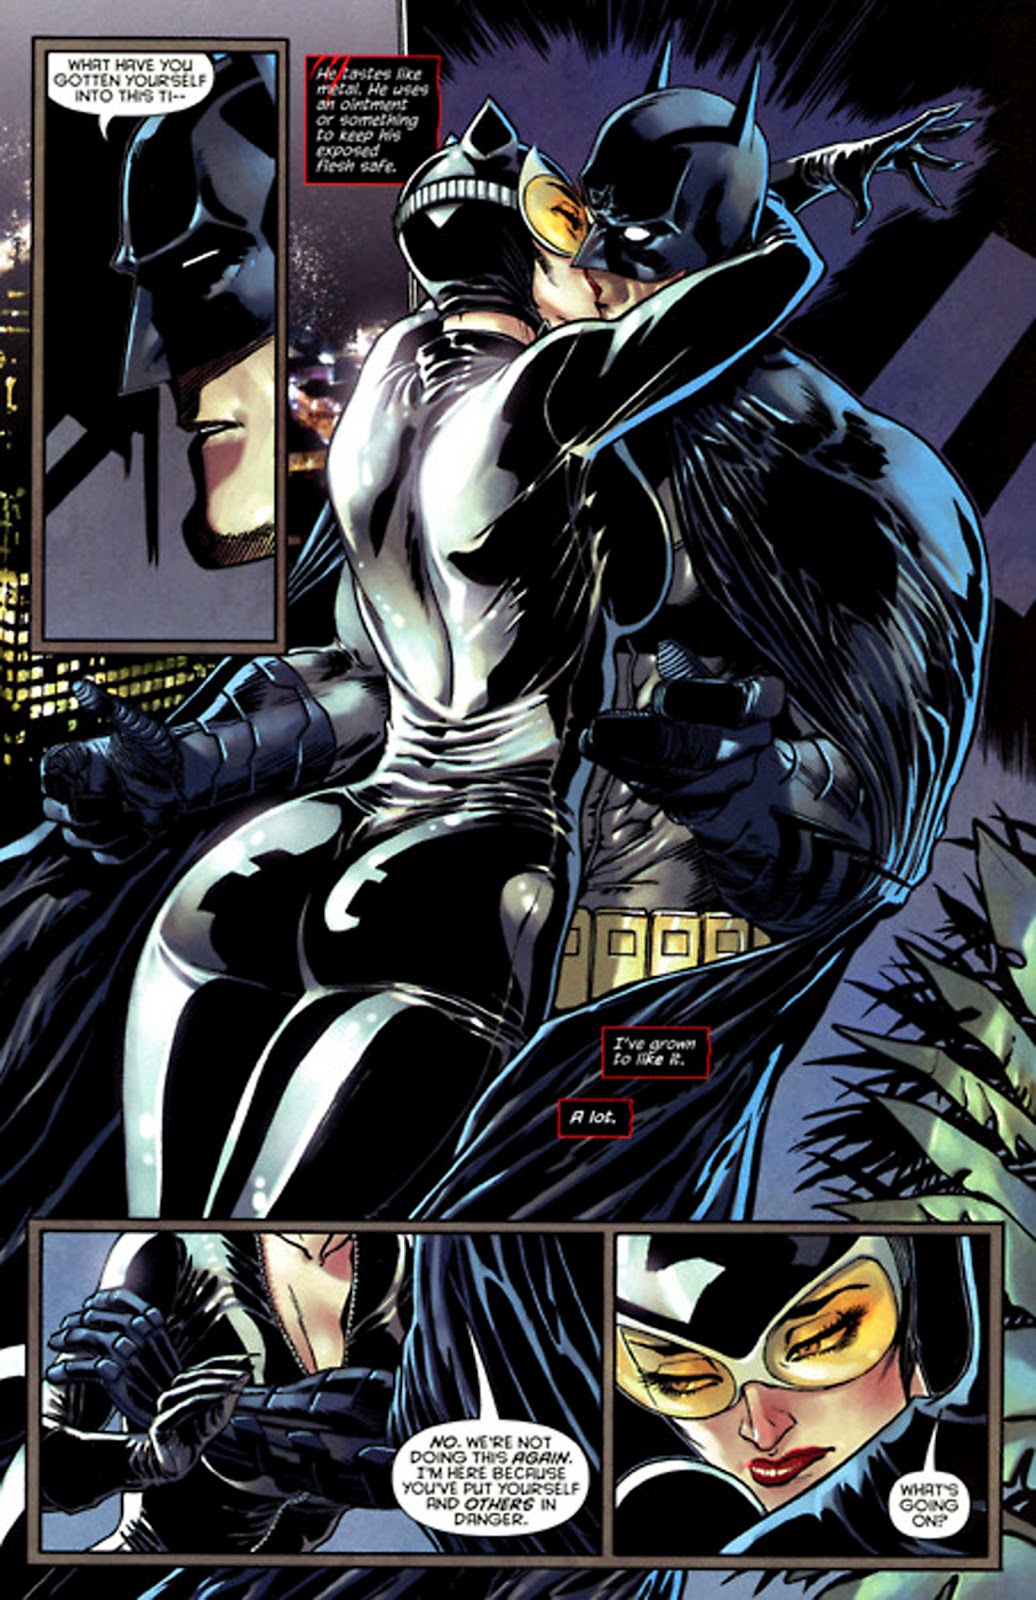 And Here Is Catwoman Ic Art By Guillem March Shown Below